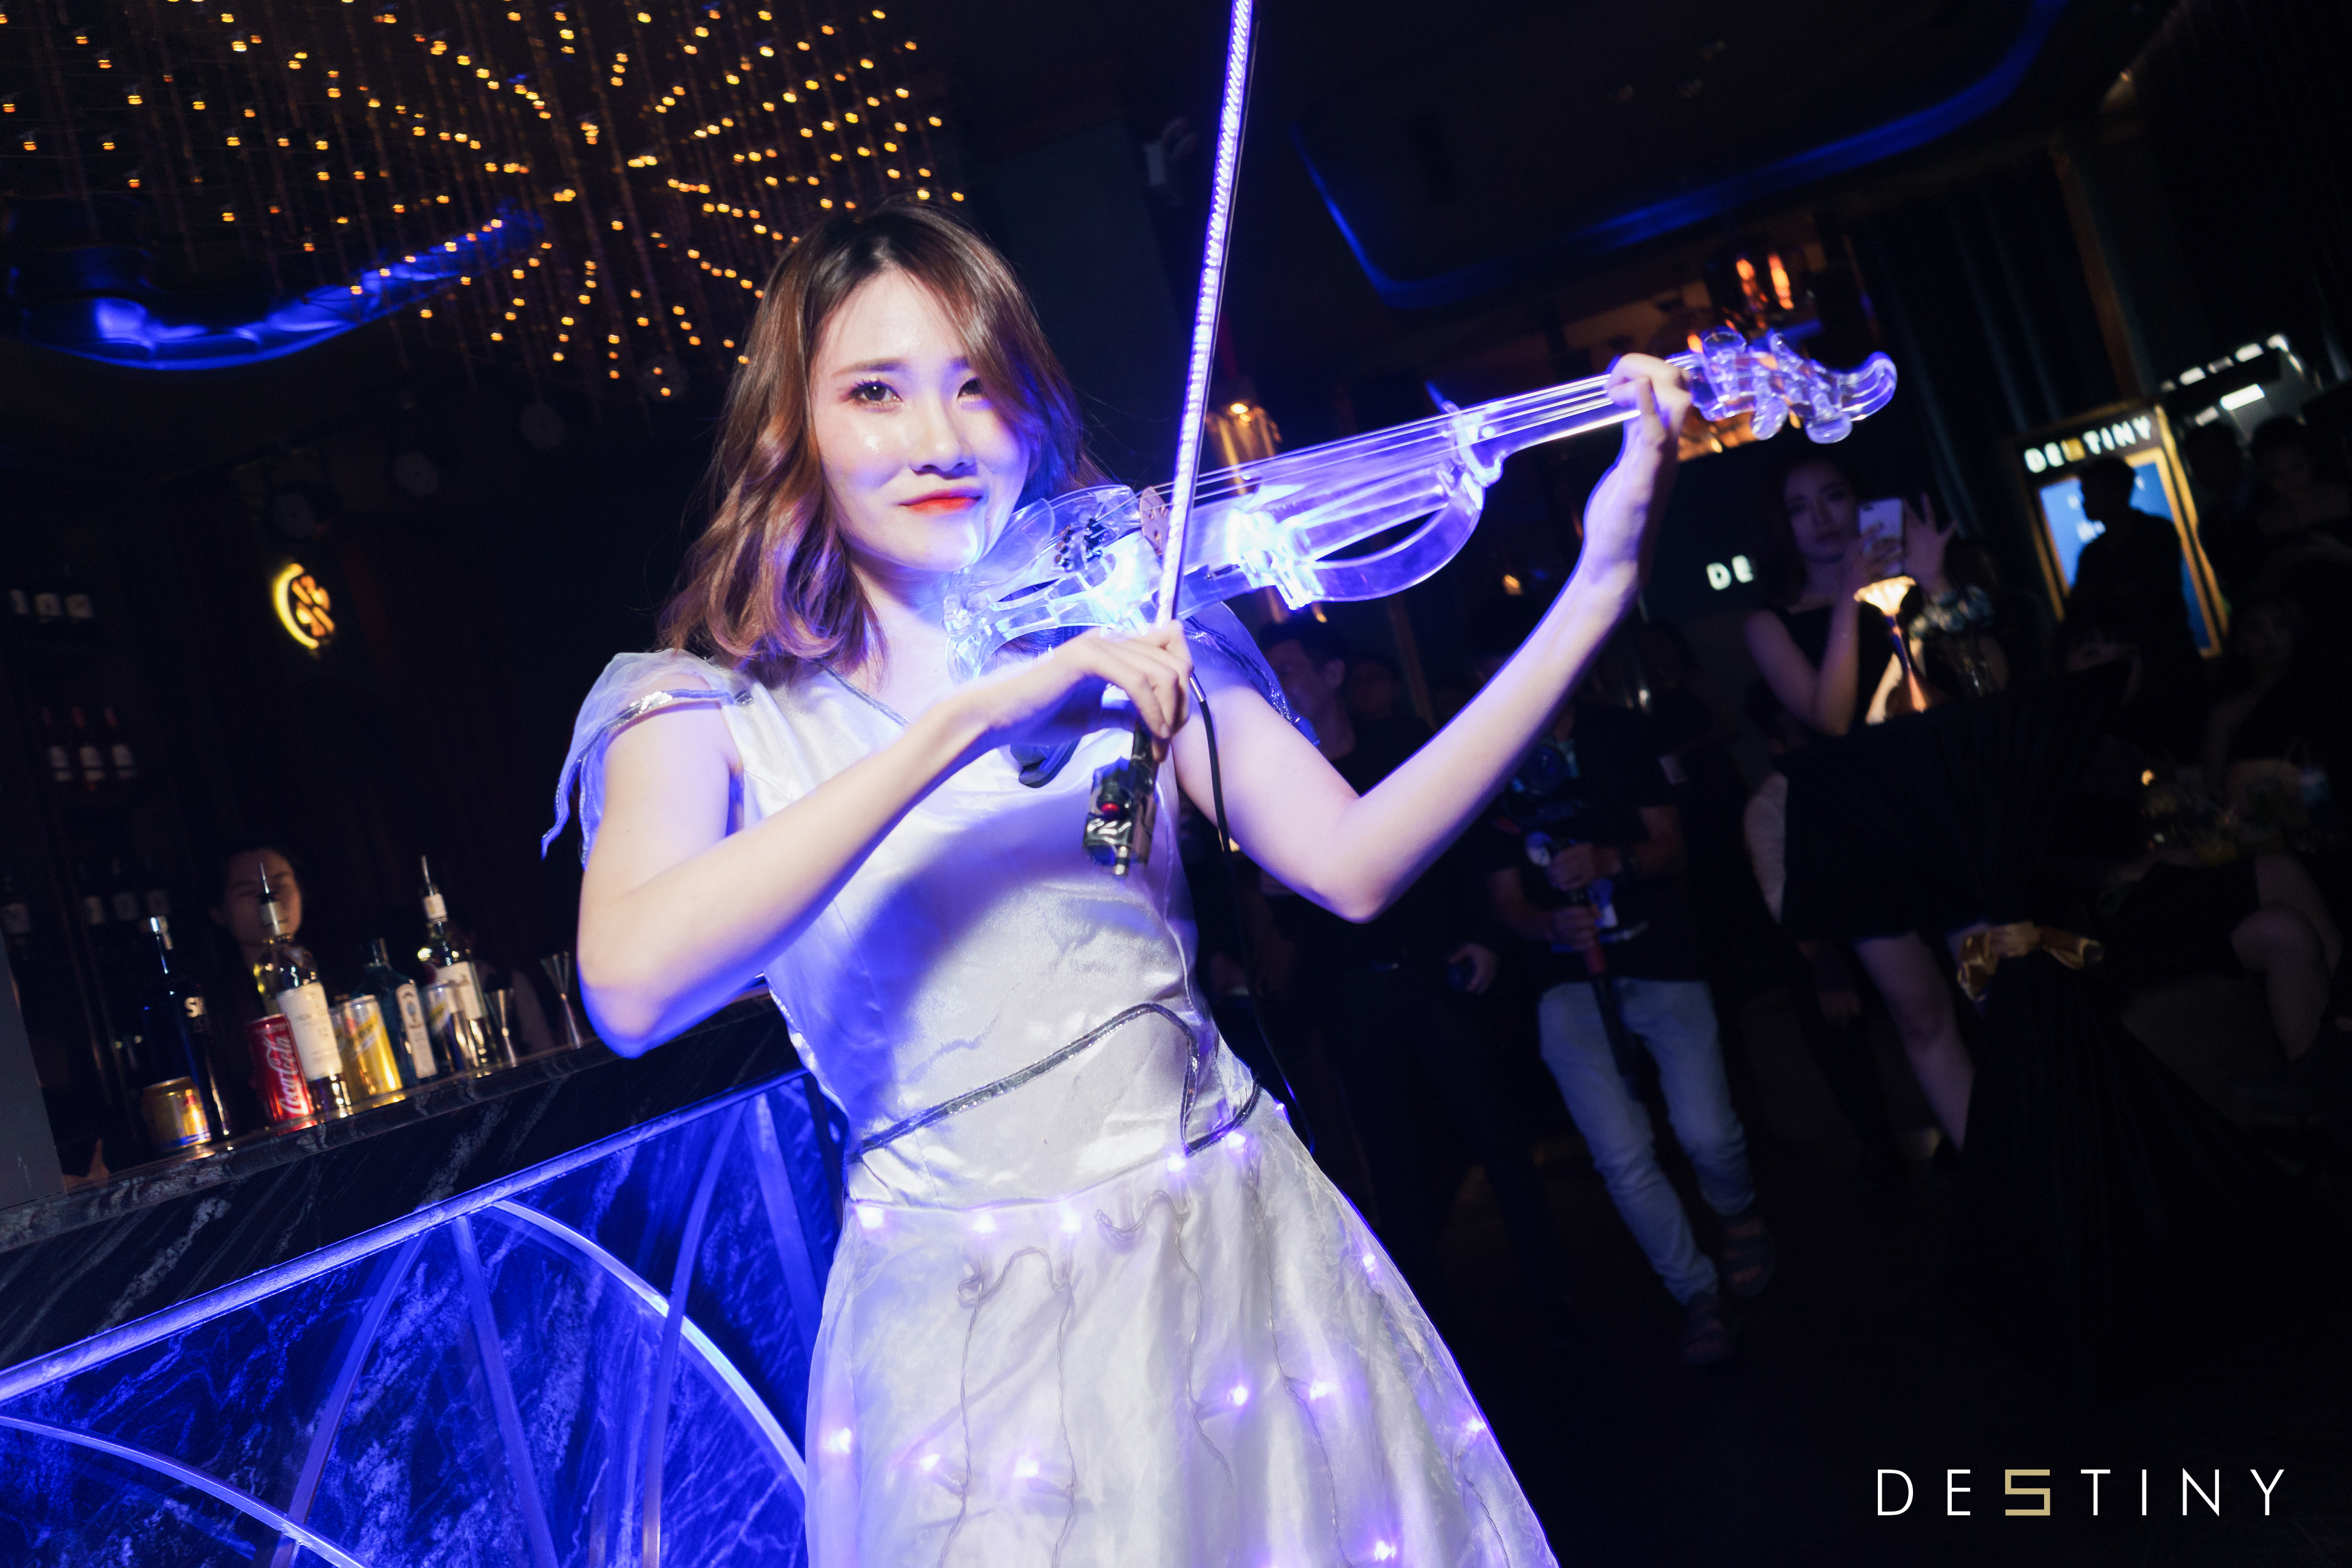 Malaysian violinist Grace Tan and her magnetizing performance